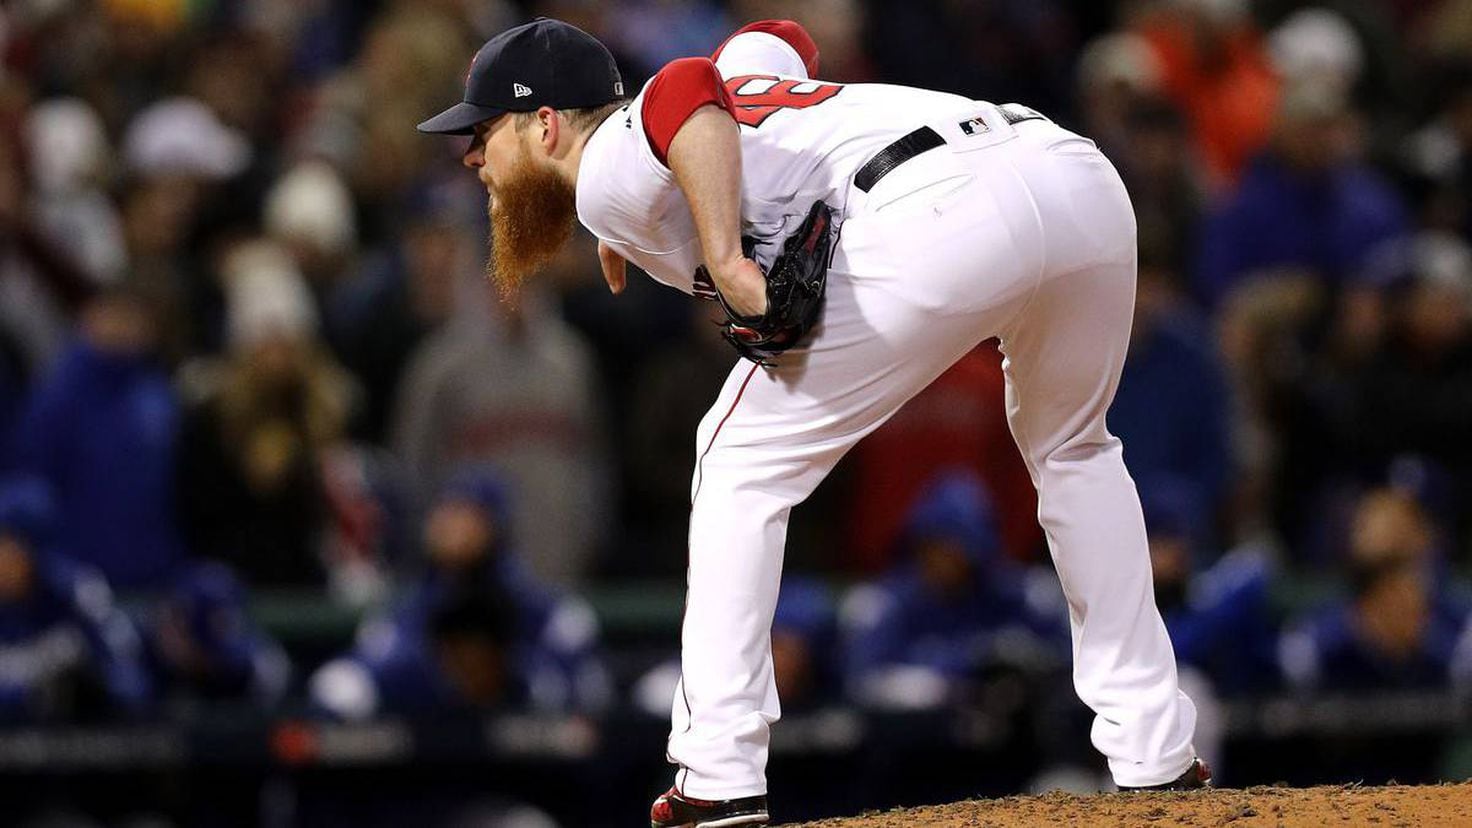 Huntsville's Craig Kimbrel hoping to get last out in 2018 World Series 